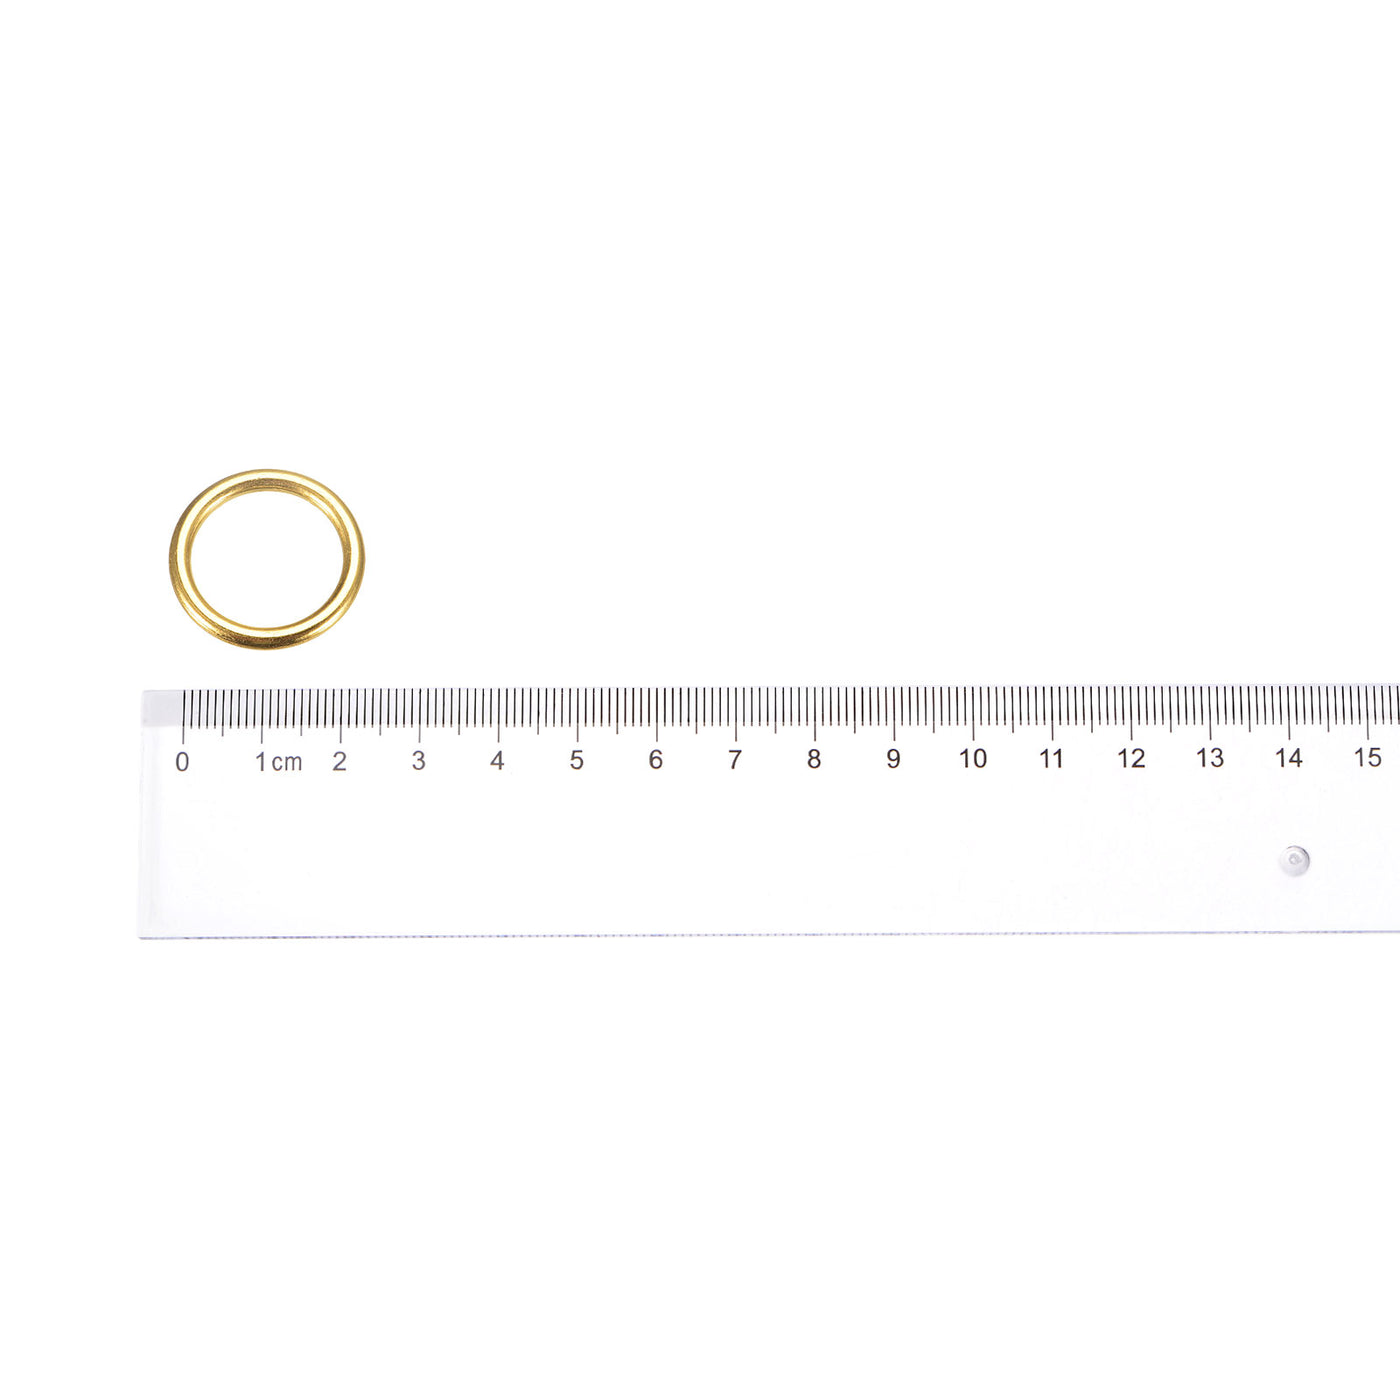 uxcell Uxcell Metal O Rings, 15pcs 20mm(0.79") ID 3mm Thick Welded O-Ringe, Gold Tone